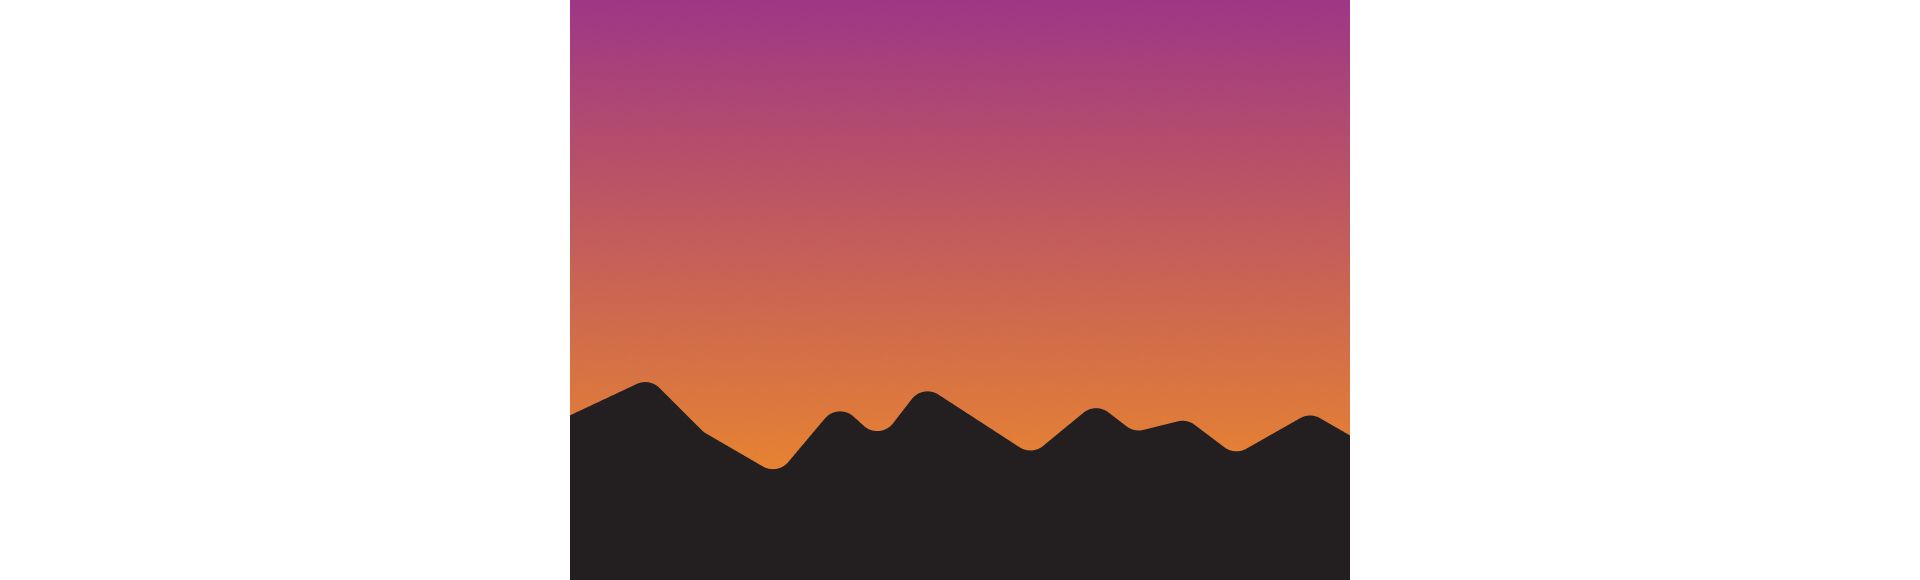 background image of a sunset behind a mountain range silhouette